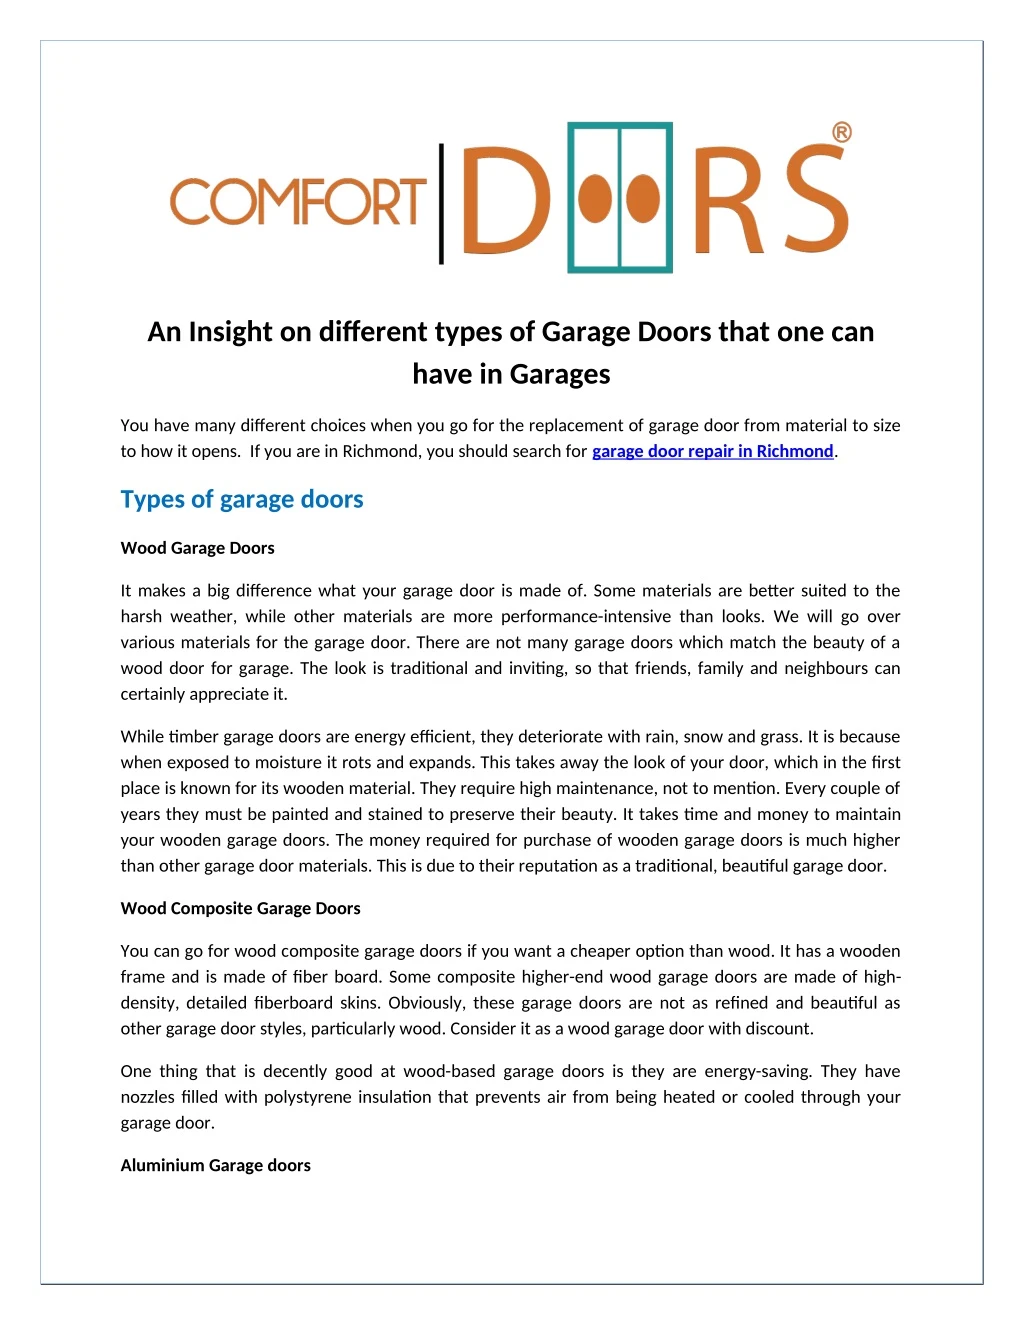 an insight on different types of garage doors